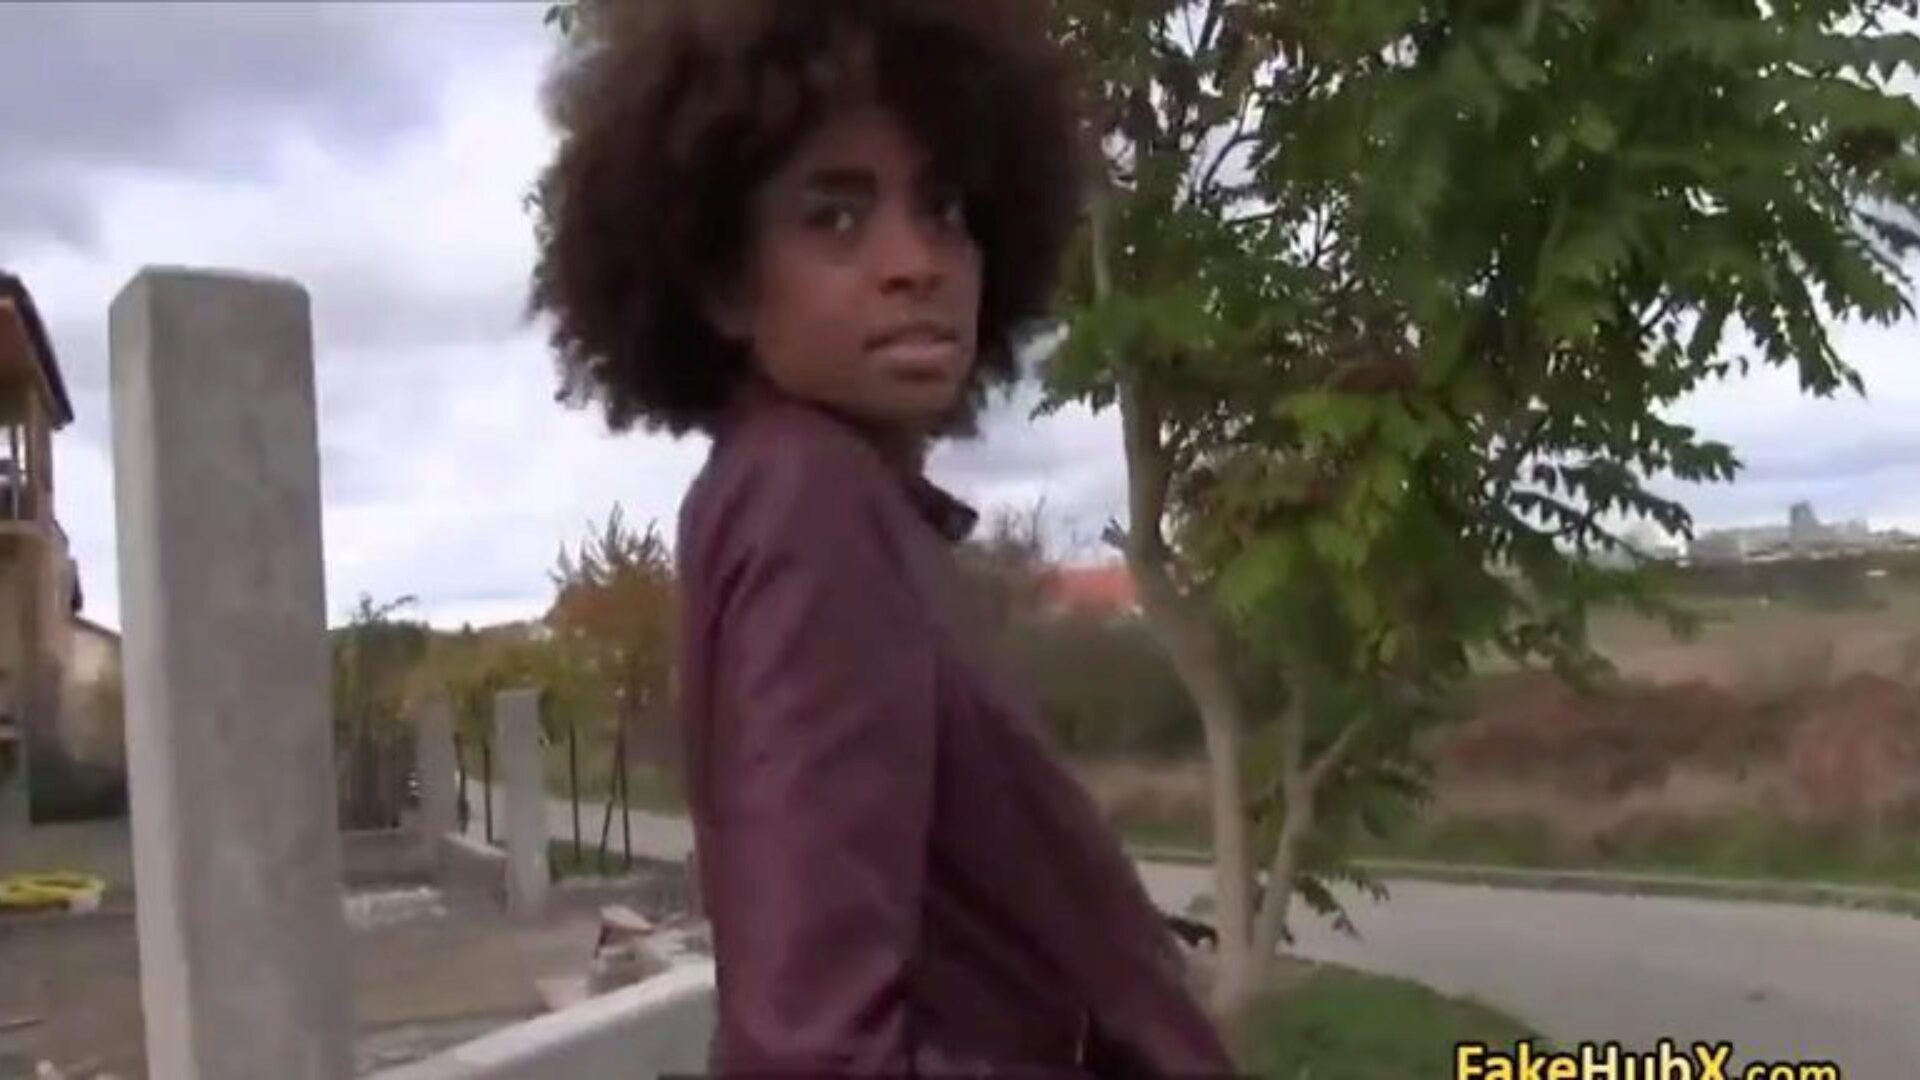 African girl copulates faux agent for money video uploaded by duledidule to at fantasti.cc - non-professional and homemade movies tube African girl fucks faux agent for money movie scene